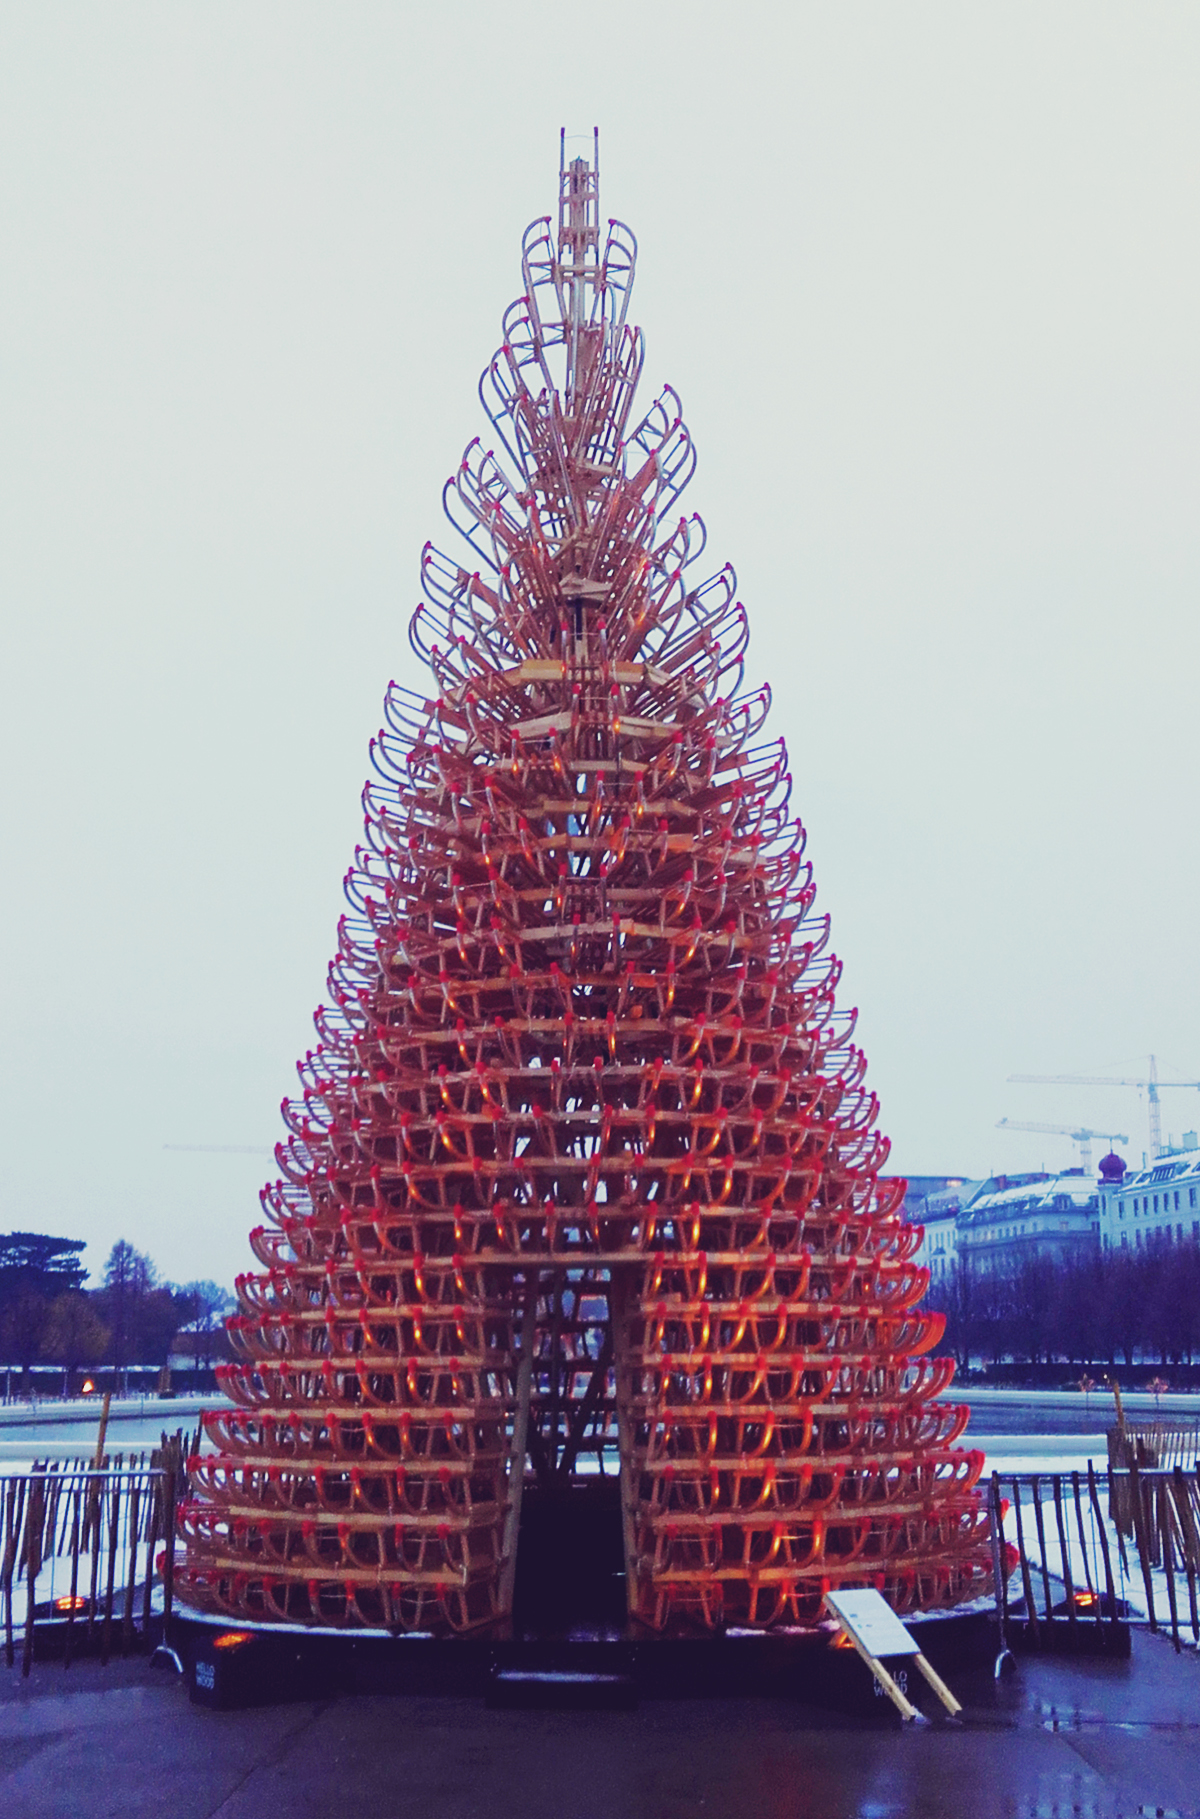 Vienna Christmas Market, creative Christmas tree made out of wood sleighs